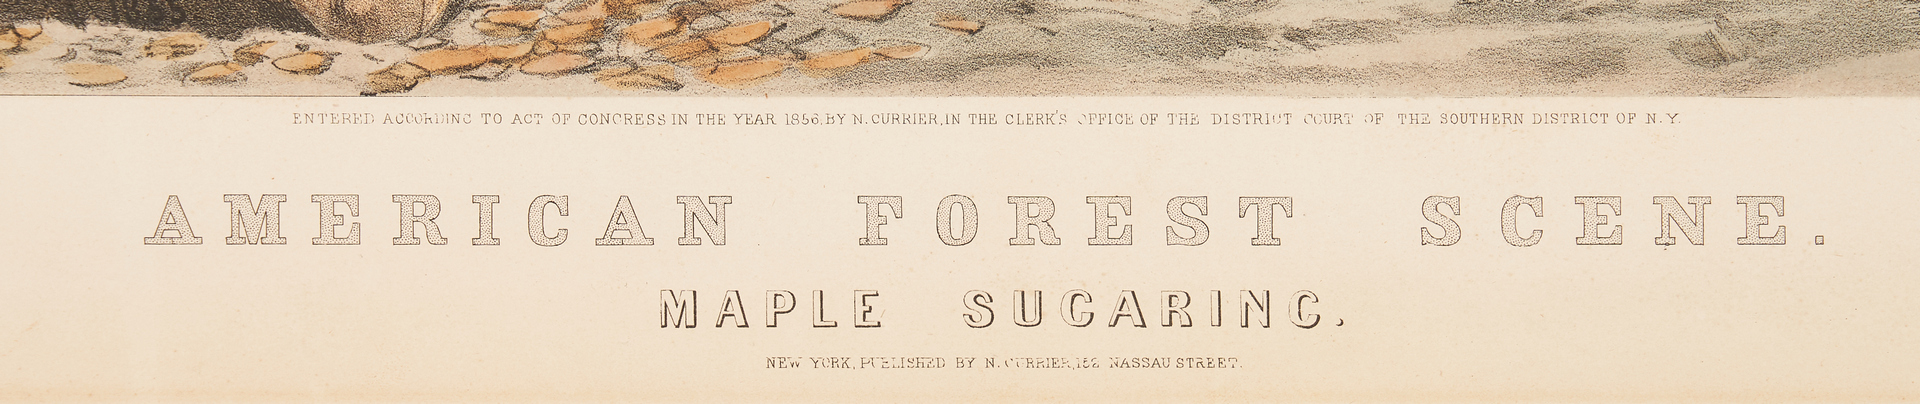 Lot 159: Currier and Ives: American Forest Scene, Maple Sugaring 1856